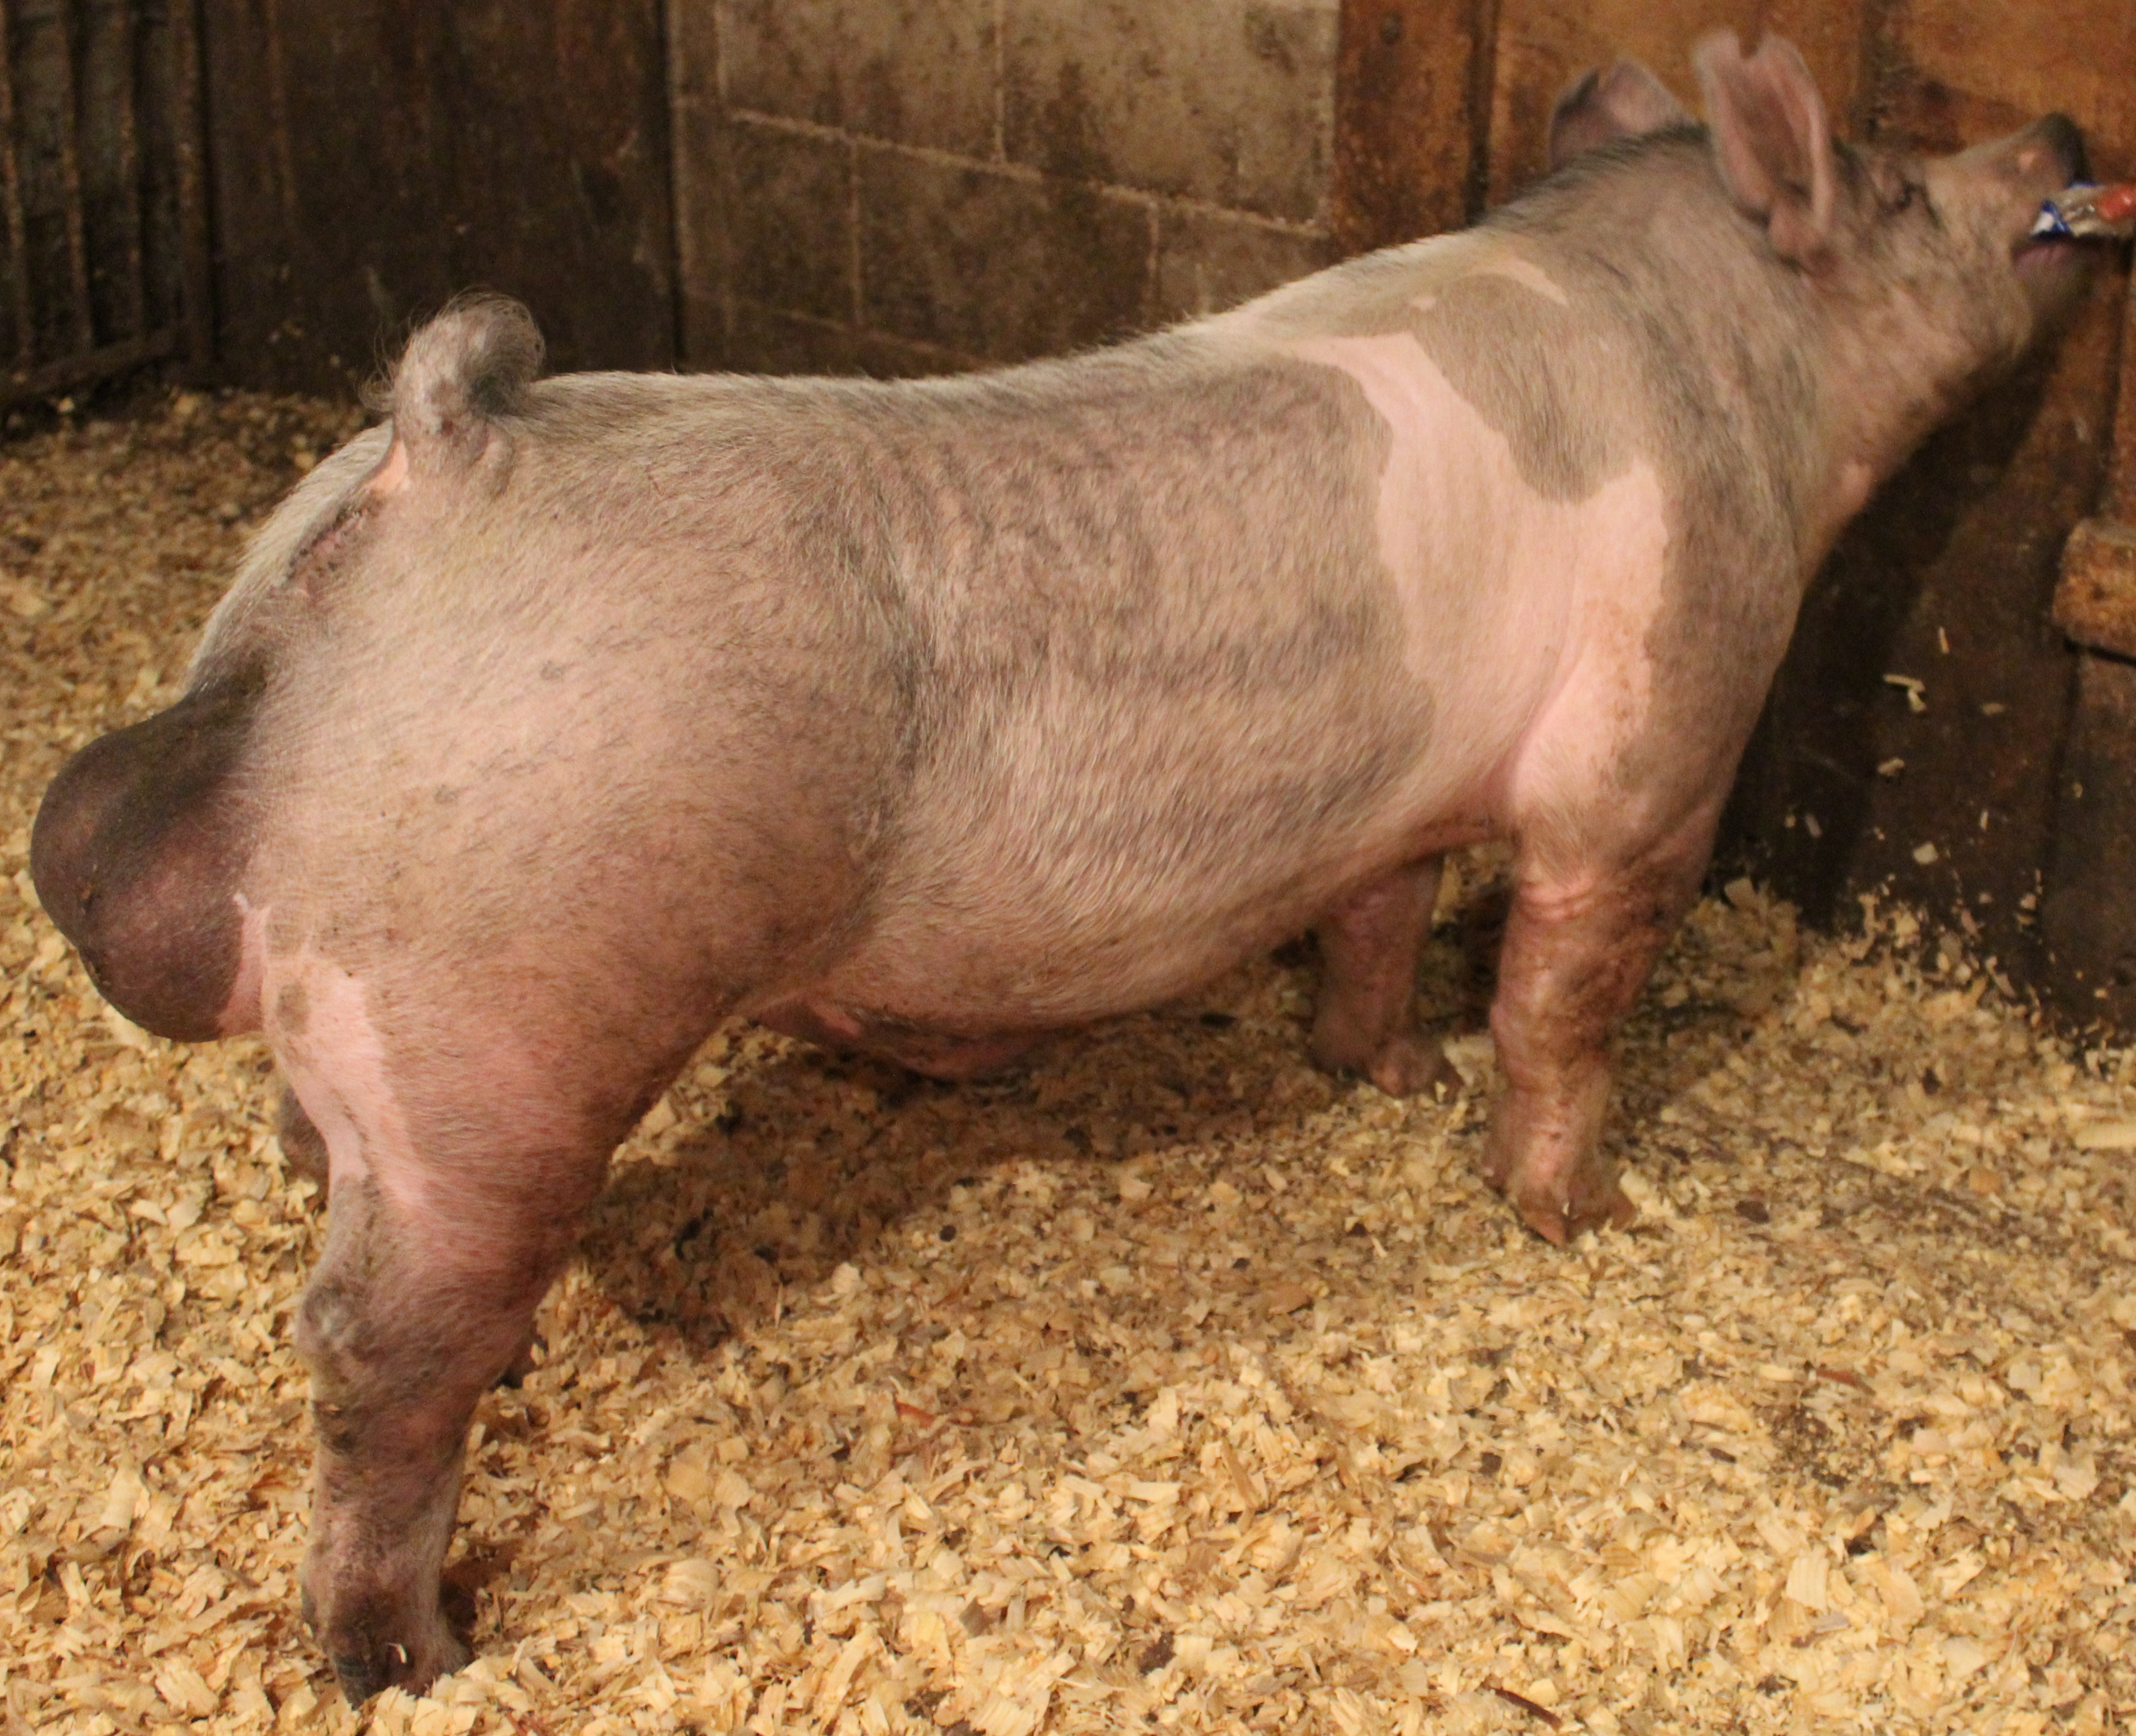 Blue By Design
Blue Print  x Papa Smurf
Bred by: Prater Show Pigs